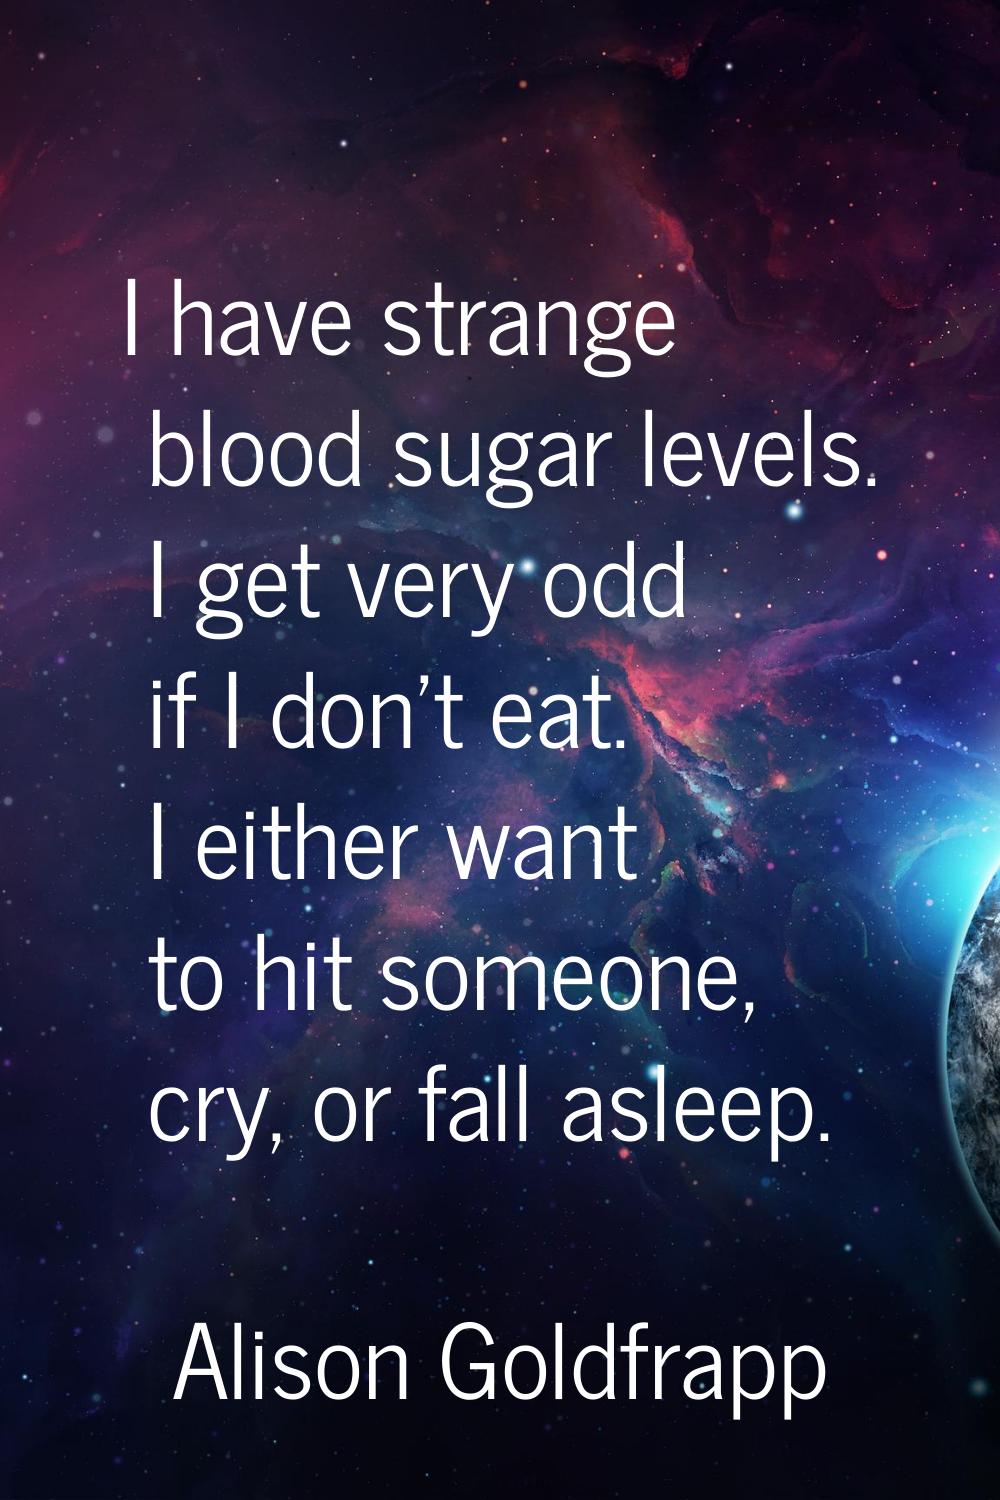 I have strange blood sugar levels. I get very odd if I don't eat. I either want to hit someone, cry